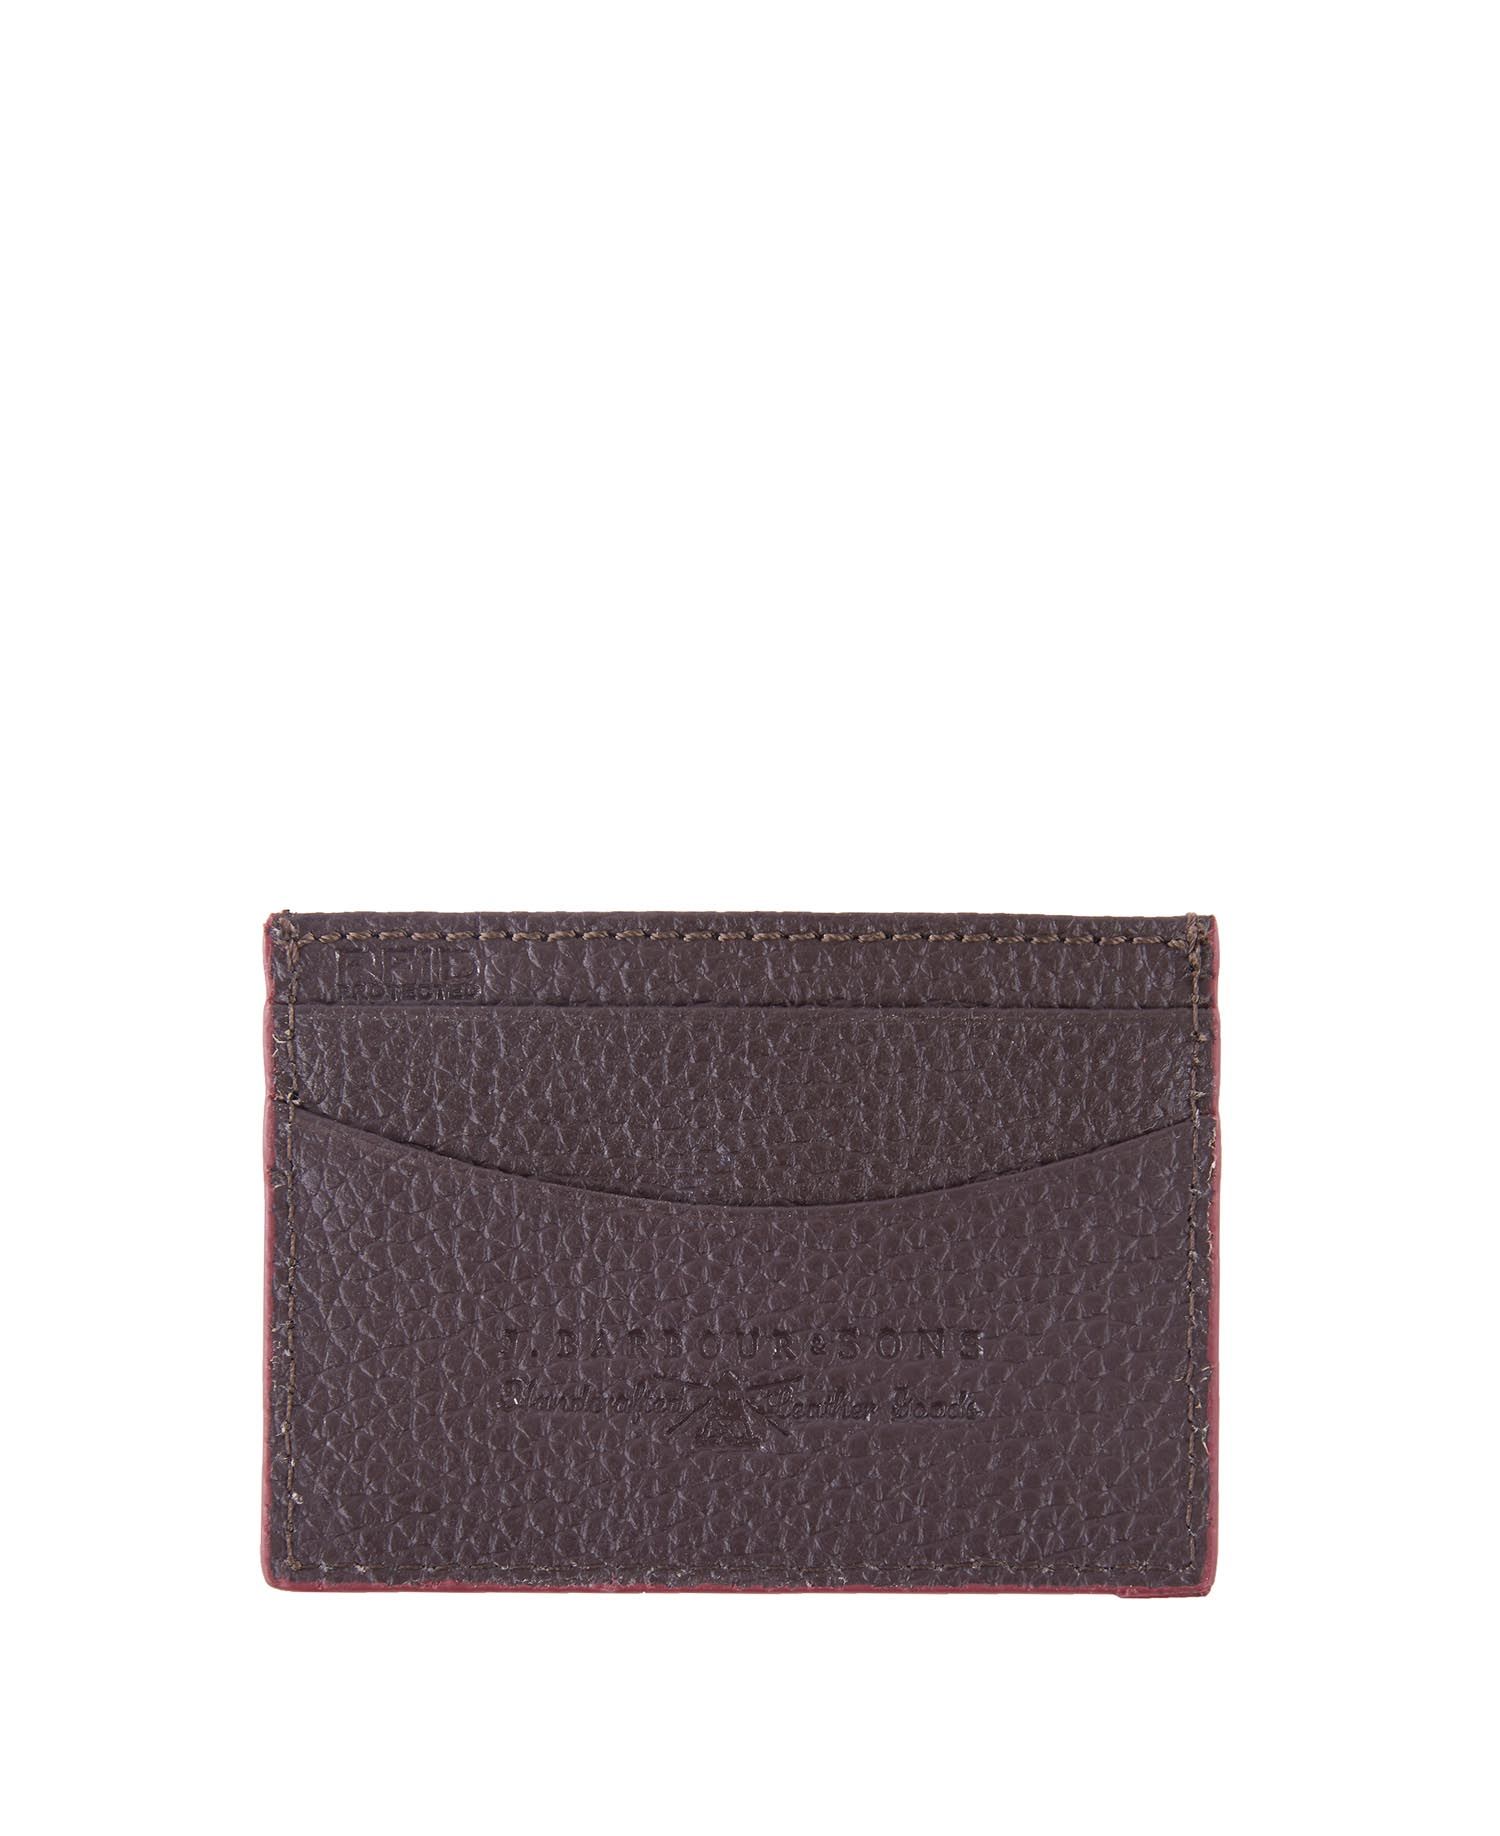 Barbour Grain Leather Card Holder